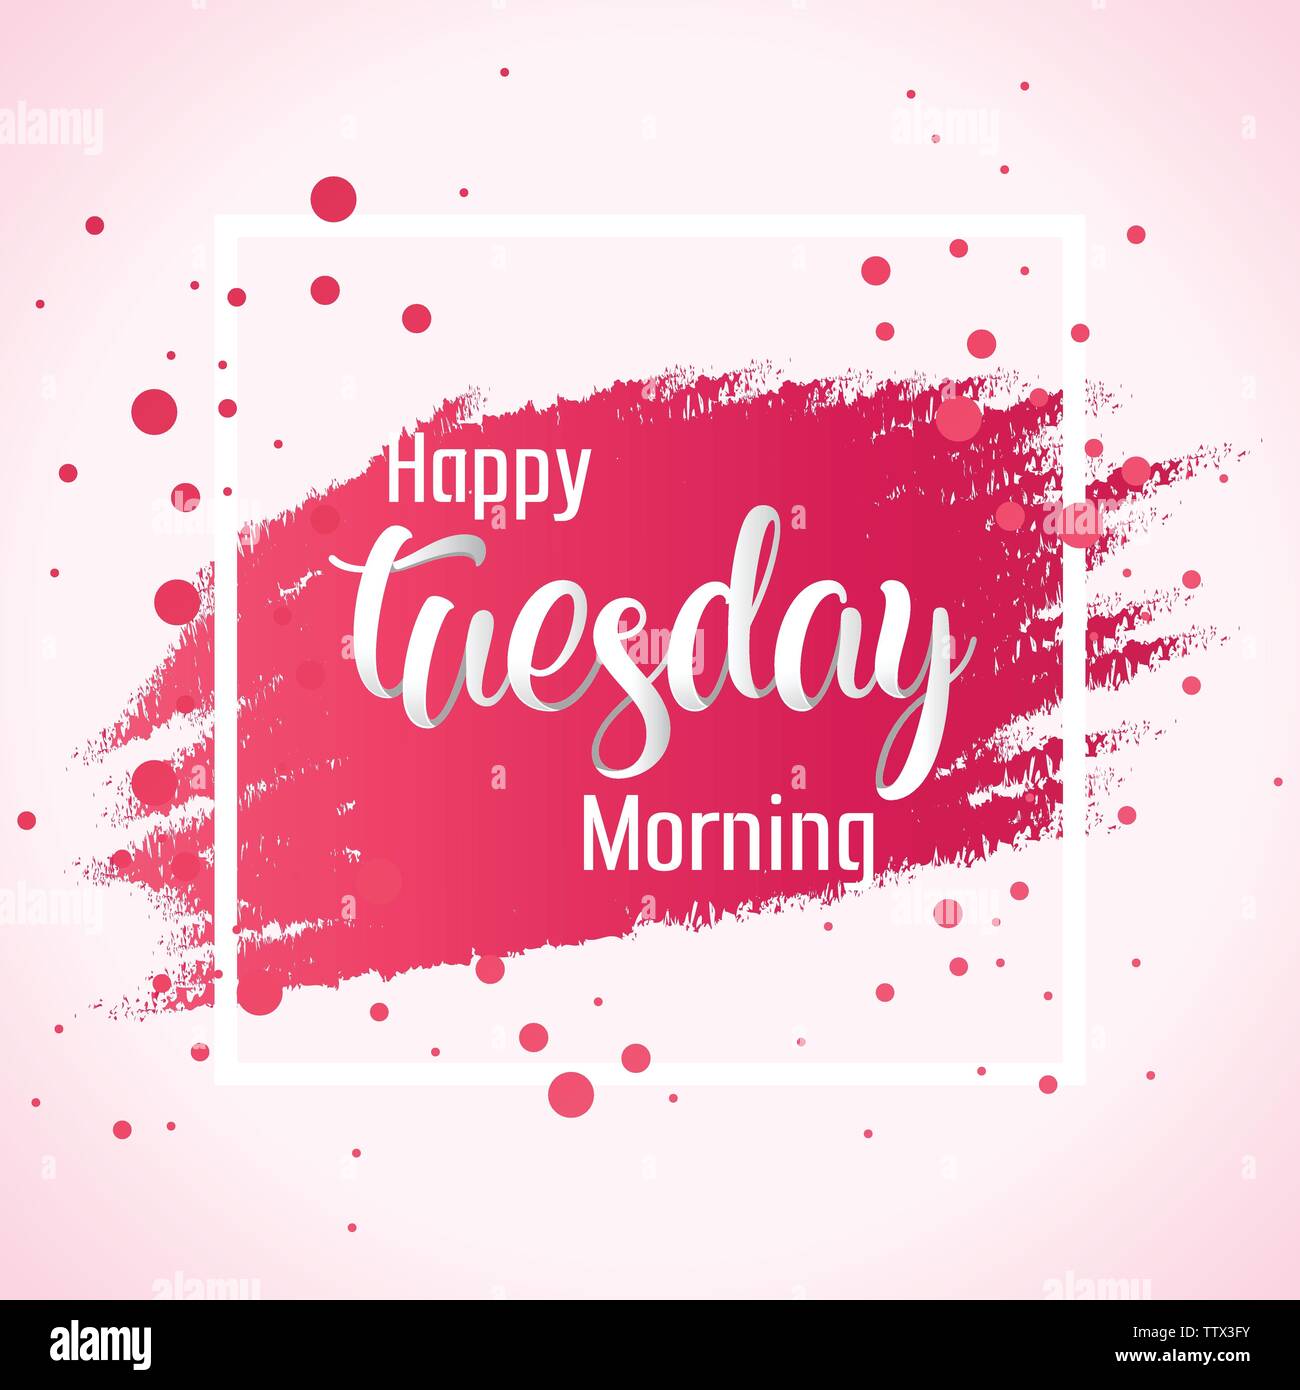 Abstract Happy Tuesday Morning Background illustration Vector ...